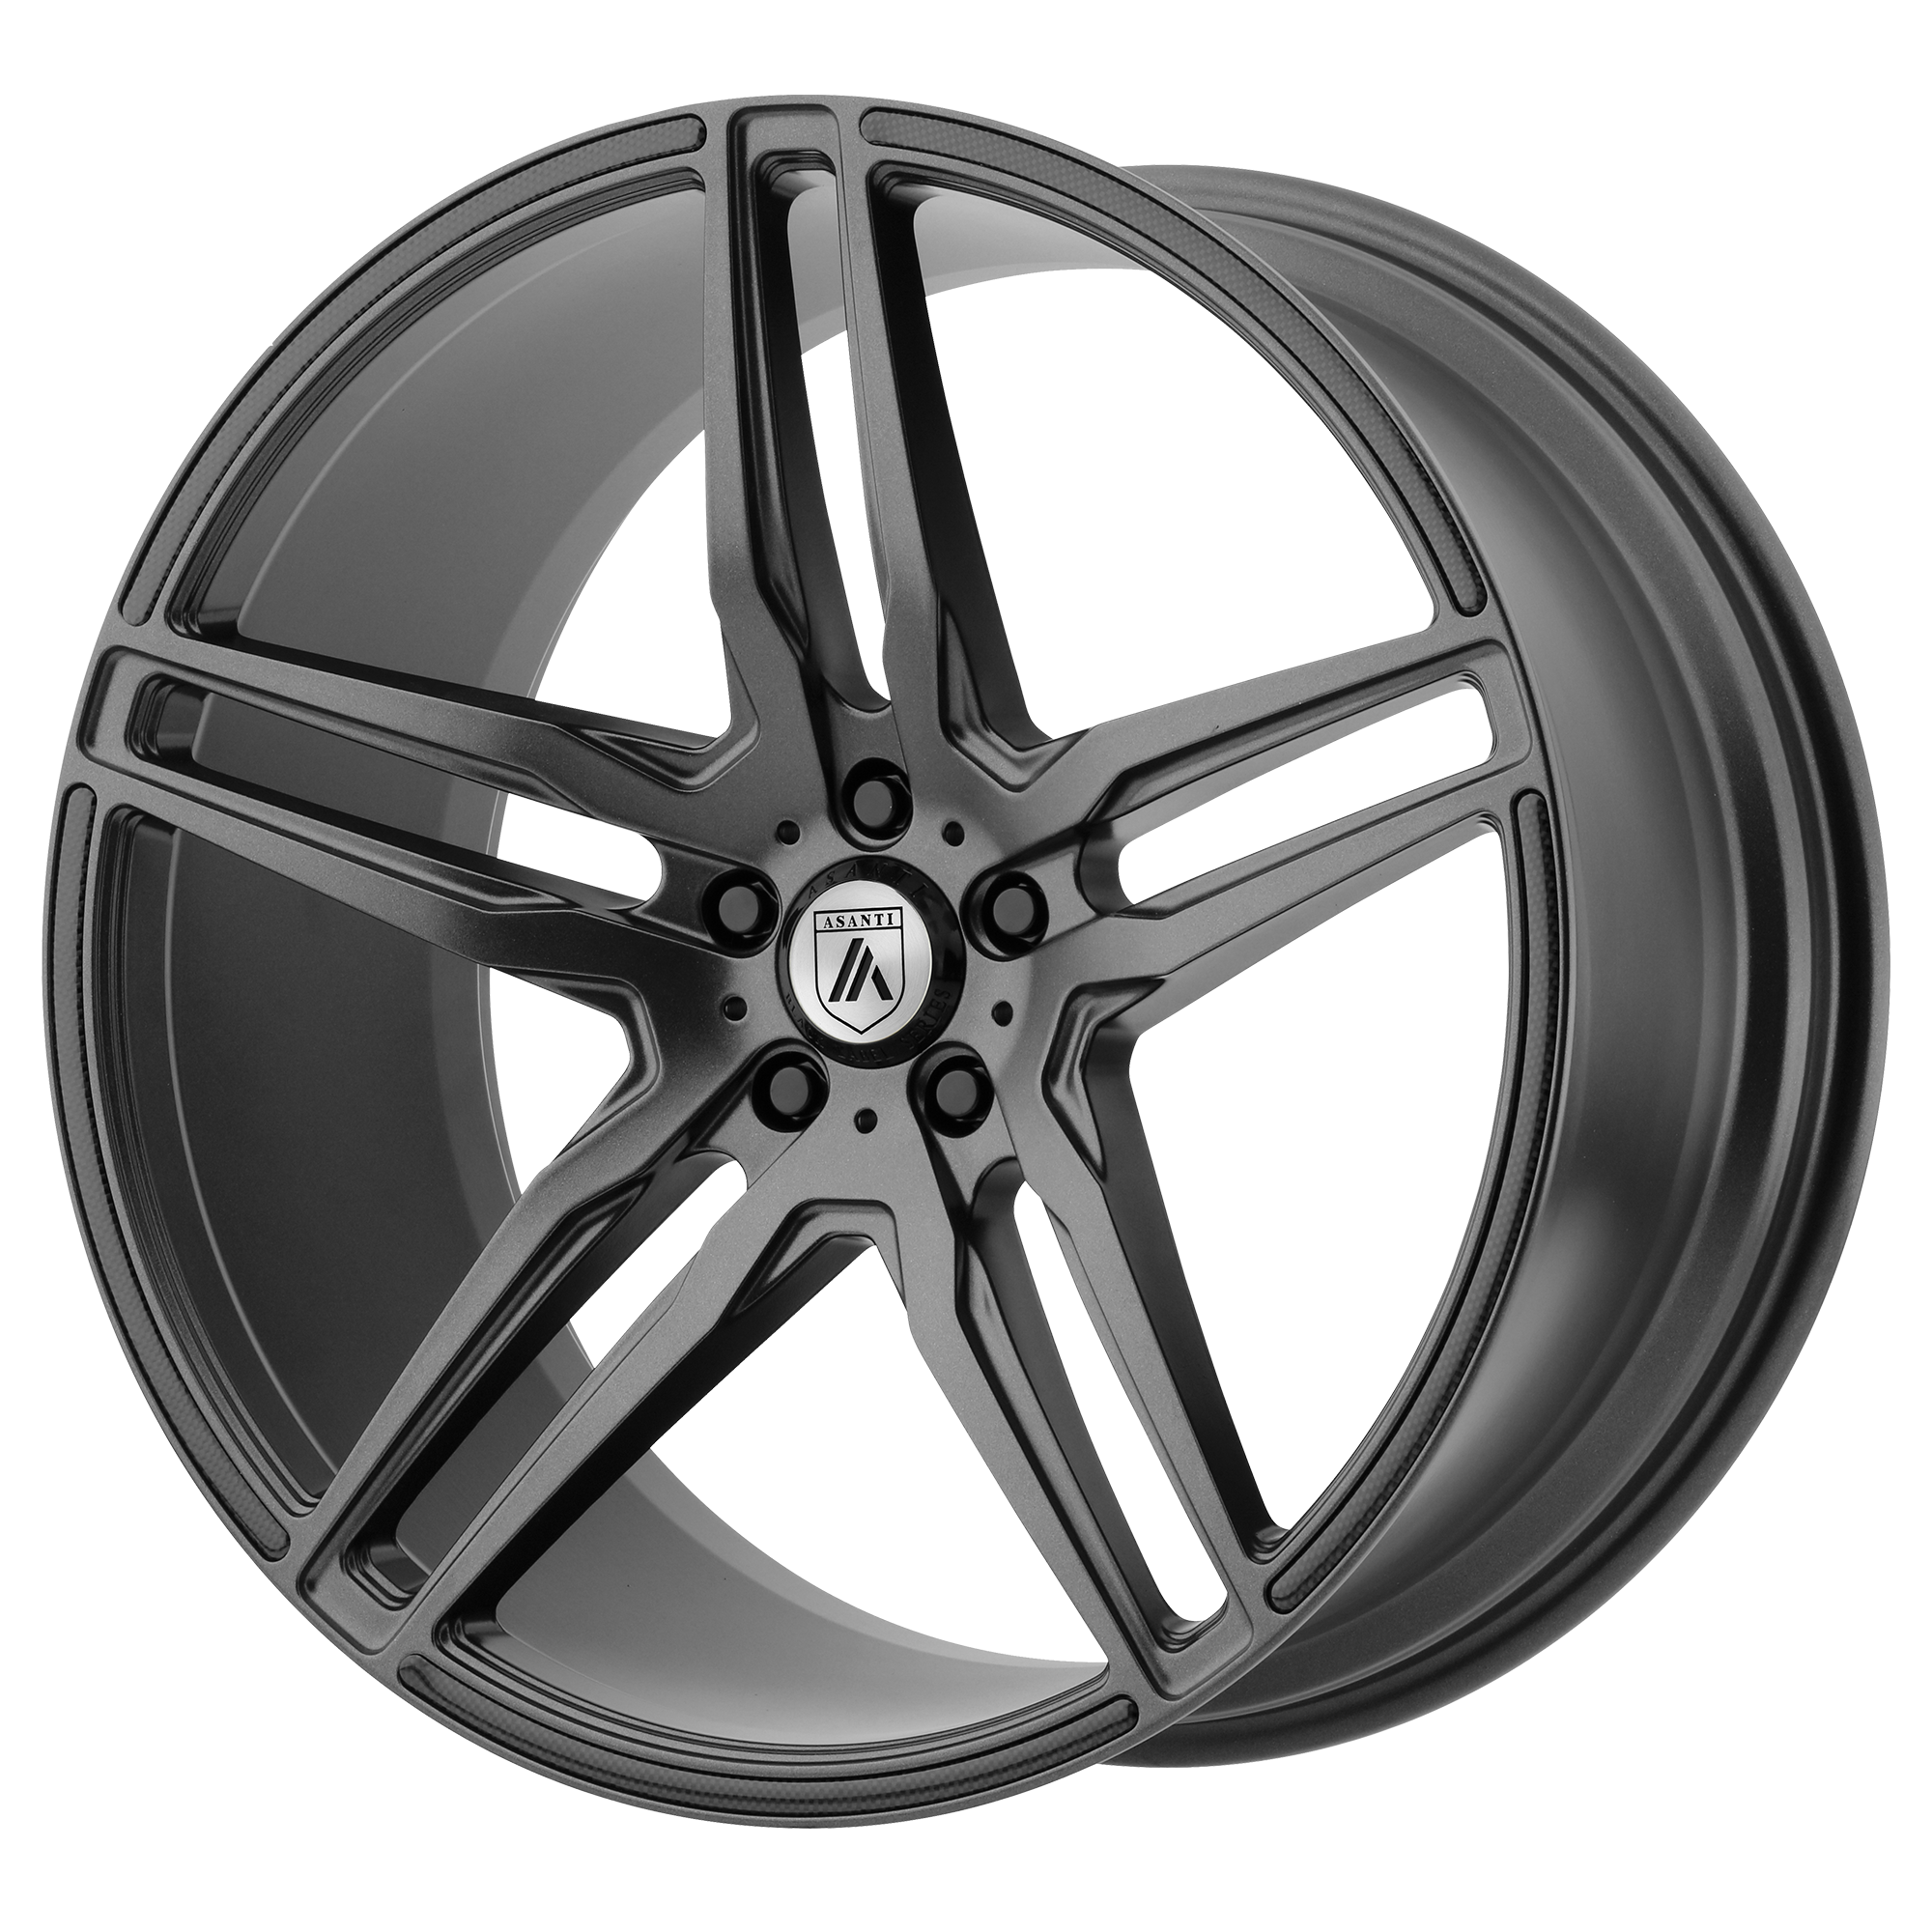 ORION 22x10.5 Blank MATTE GRAPHITE (25.00 - 34.00 mm) - Tires and Engine Performance